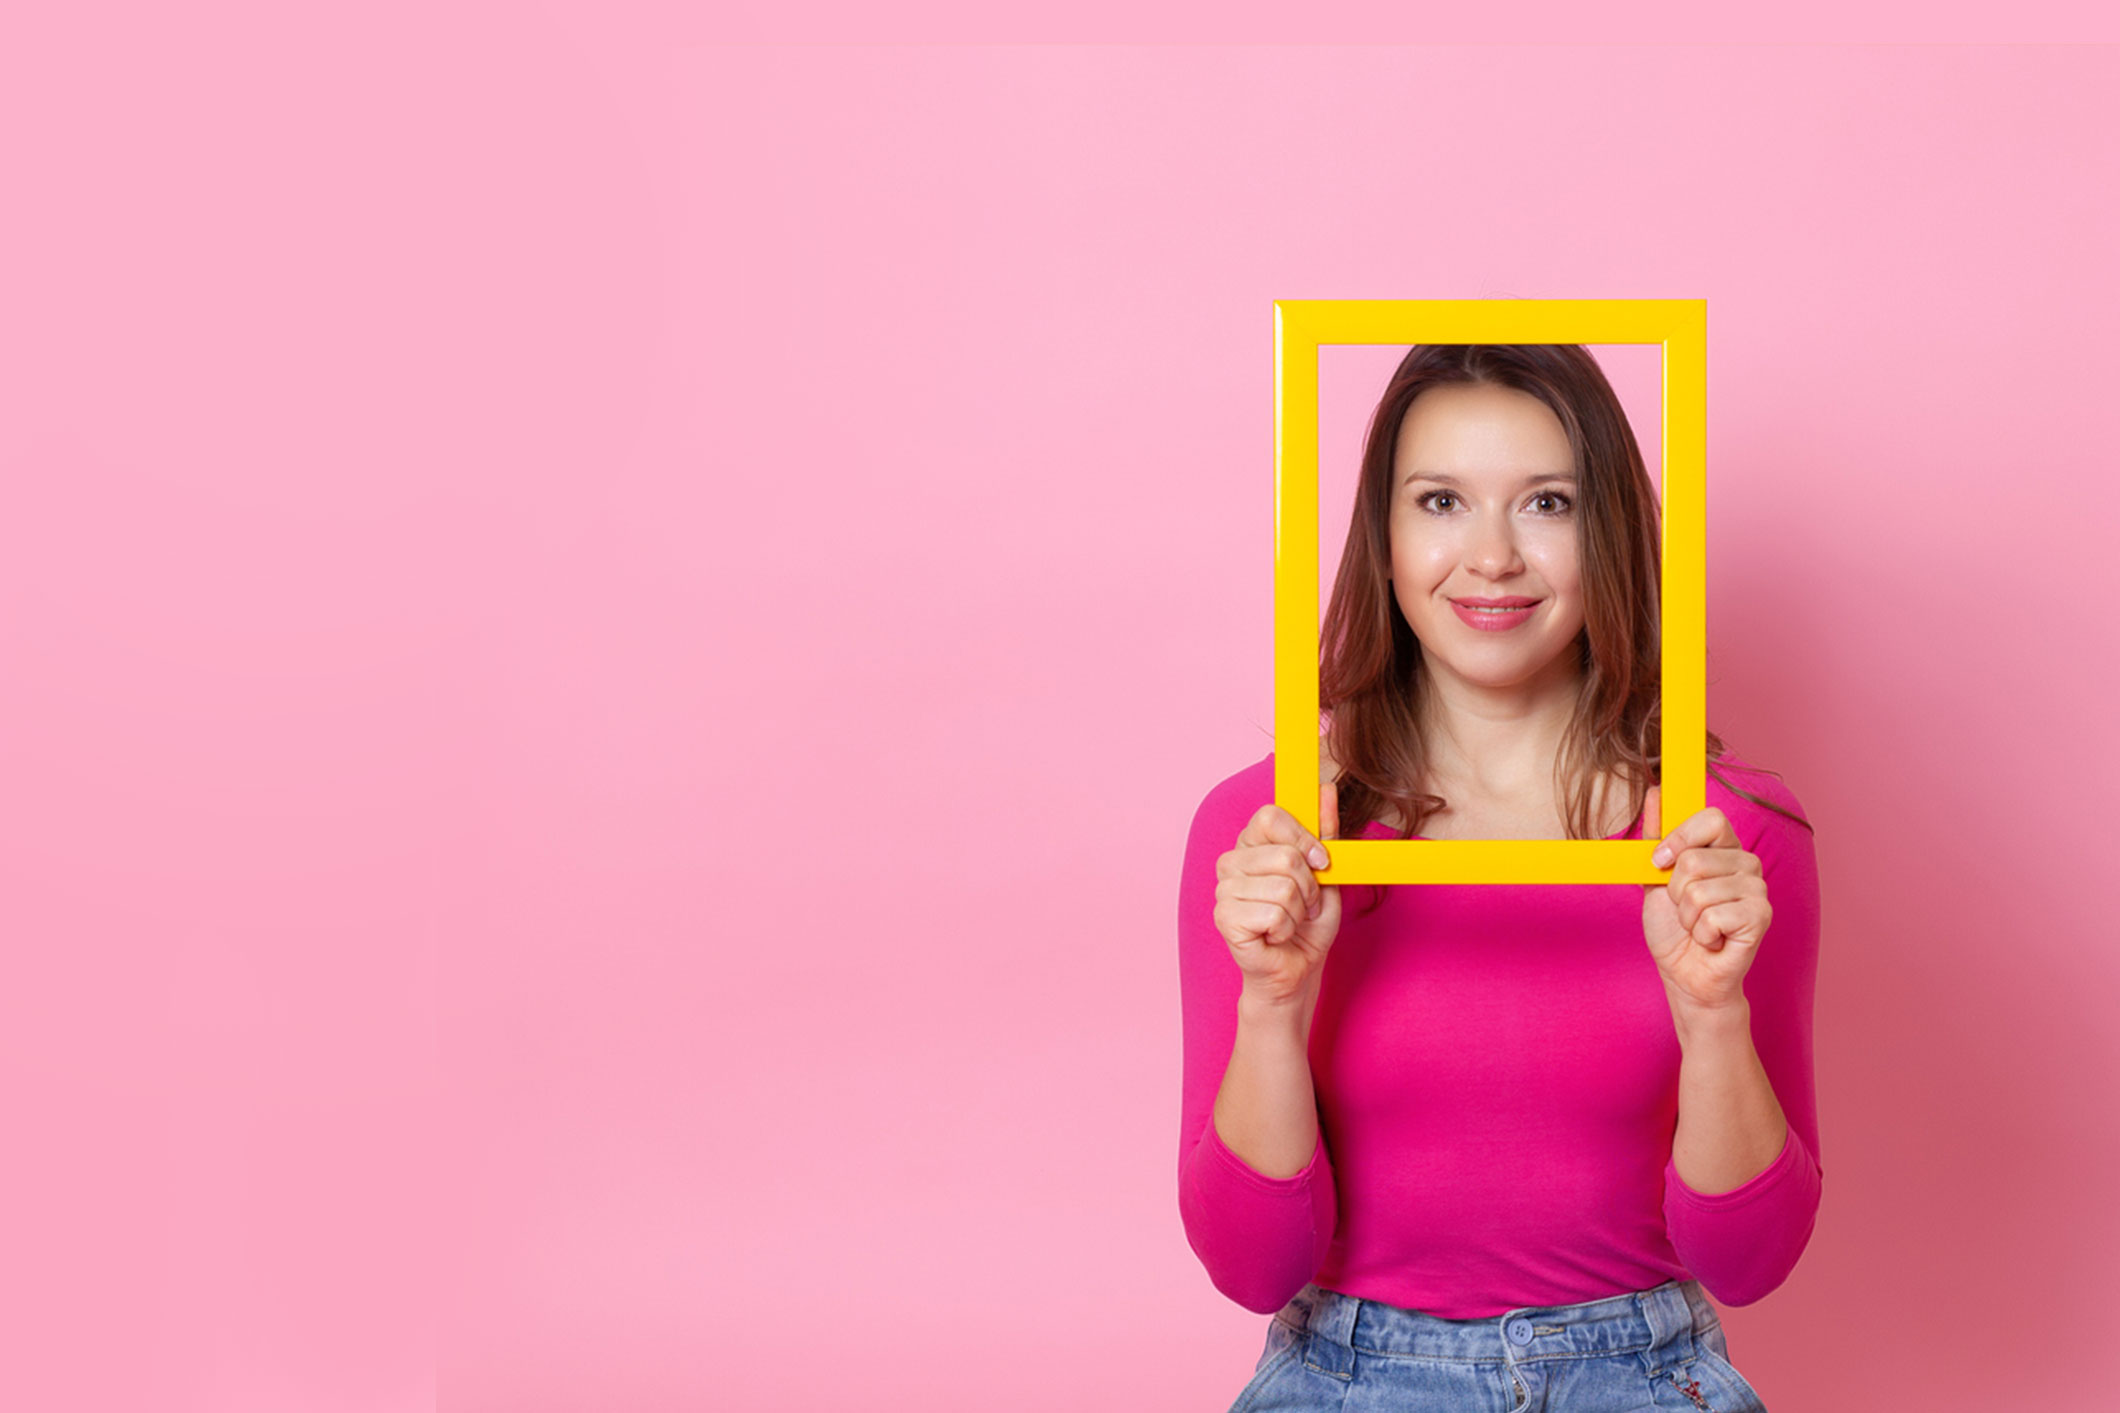 close-up portrait of a young woman with a face inside an empty yellow frame, that she holds in her hands, isolated on a pink background - for buyer personas.